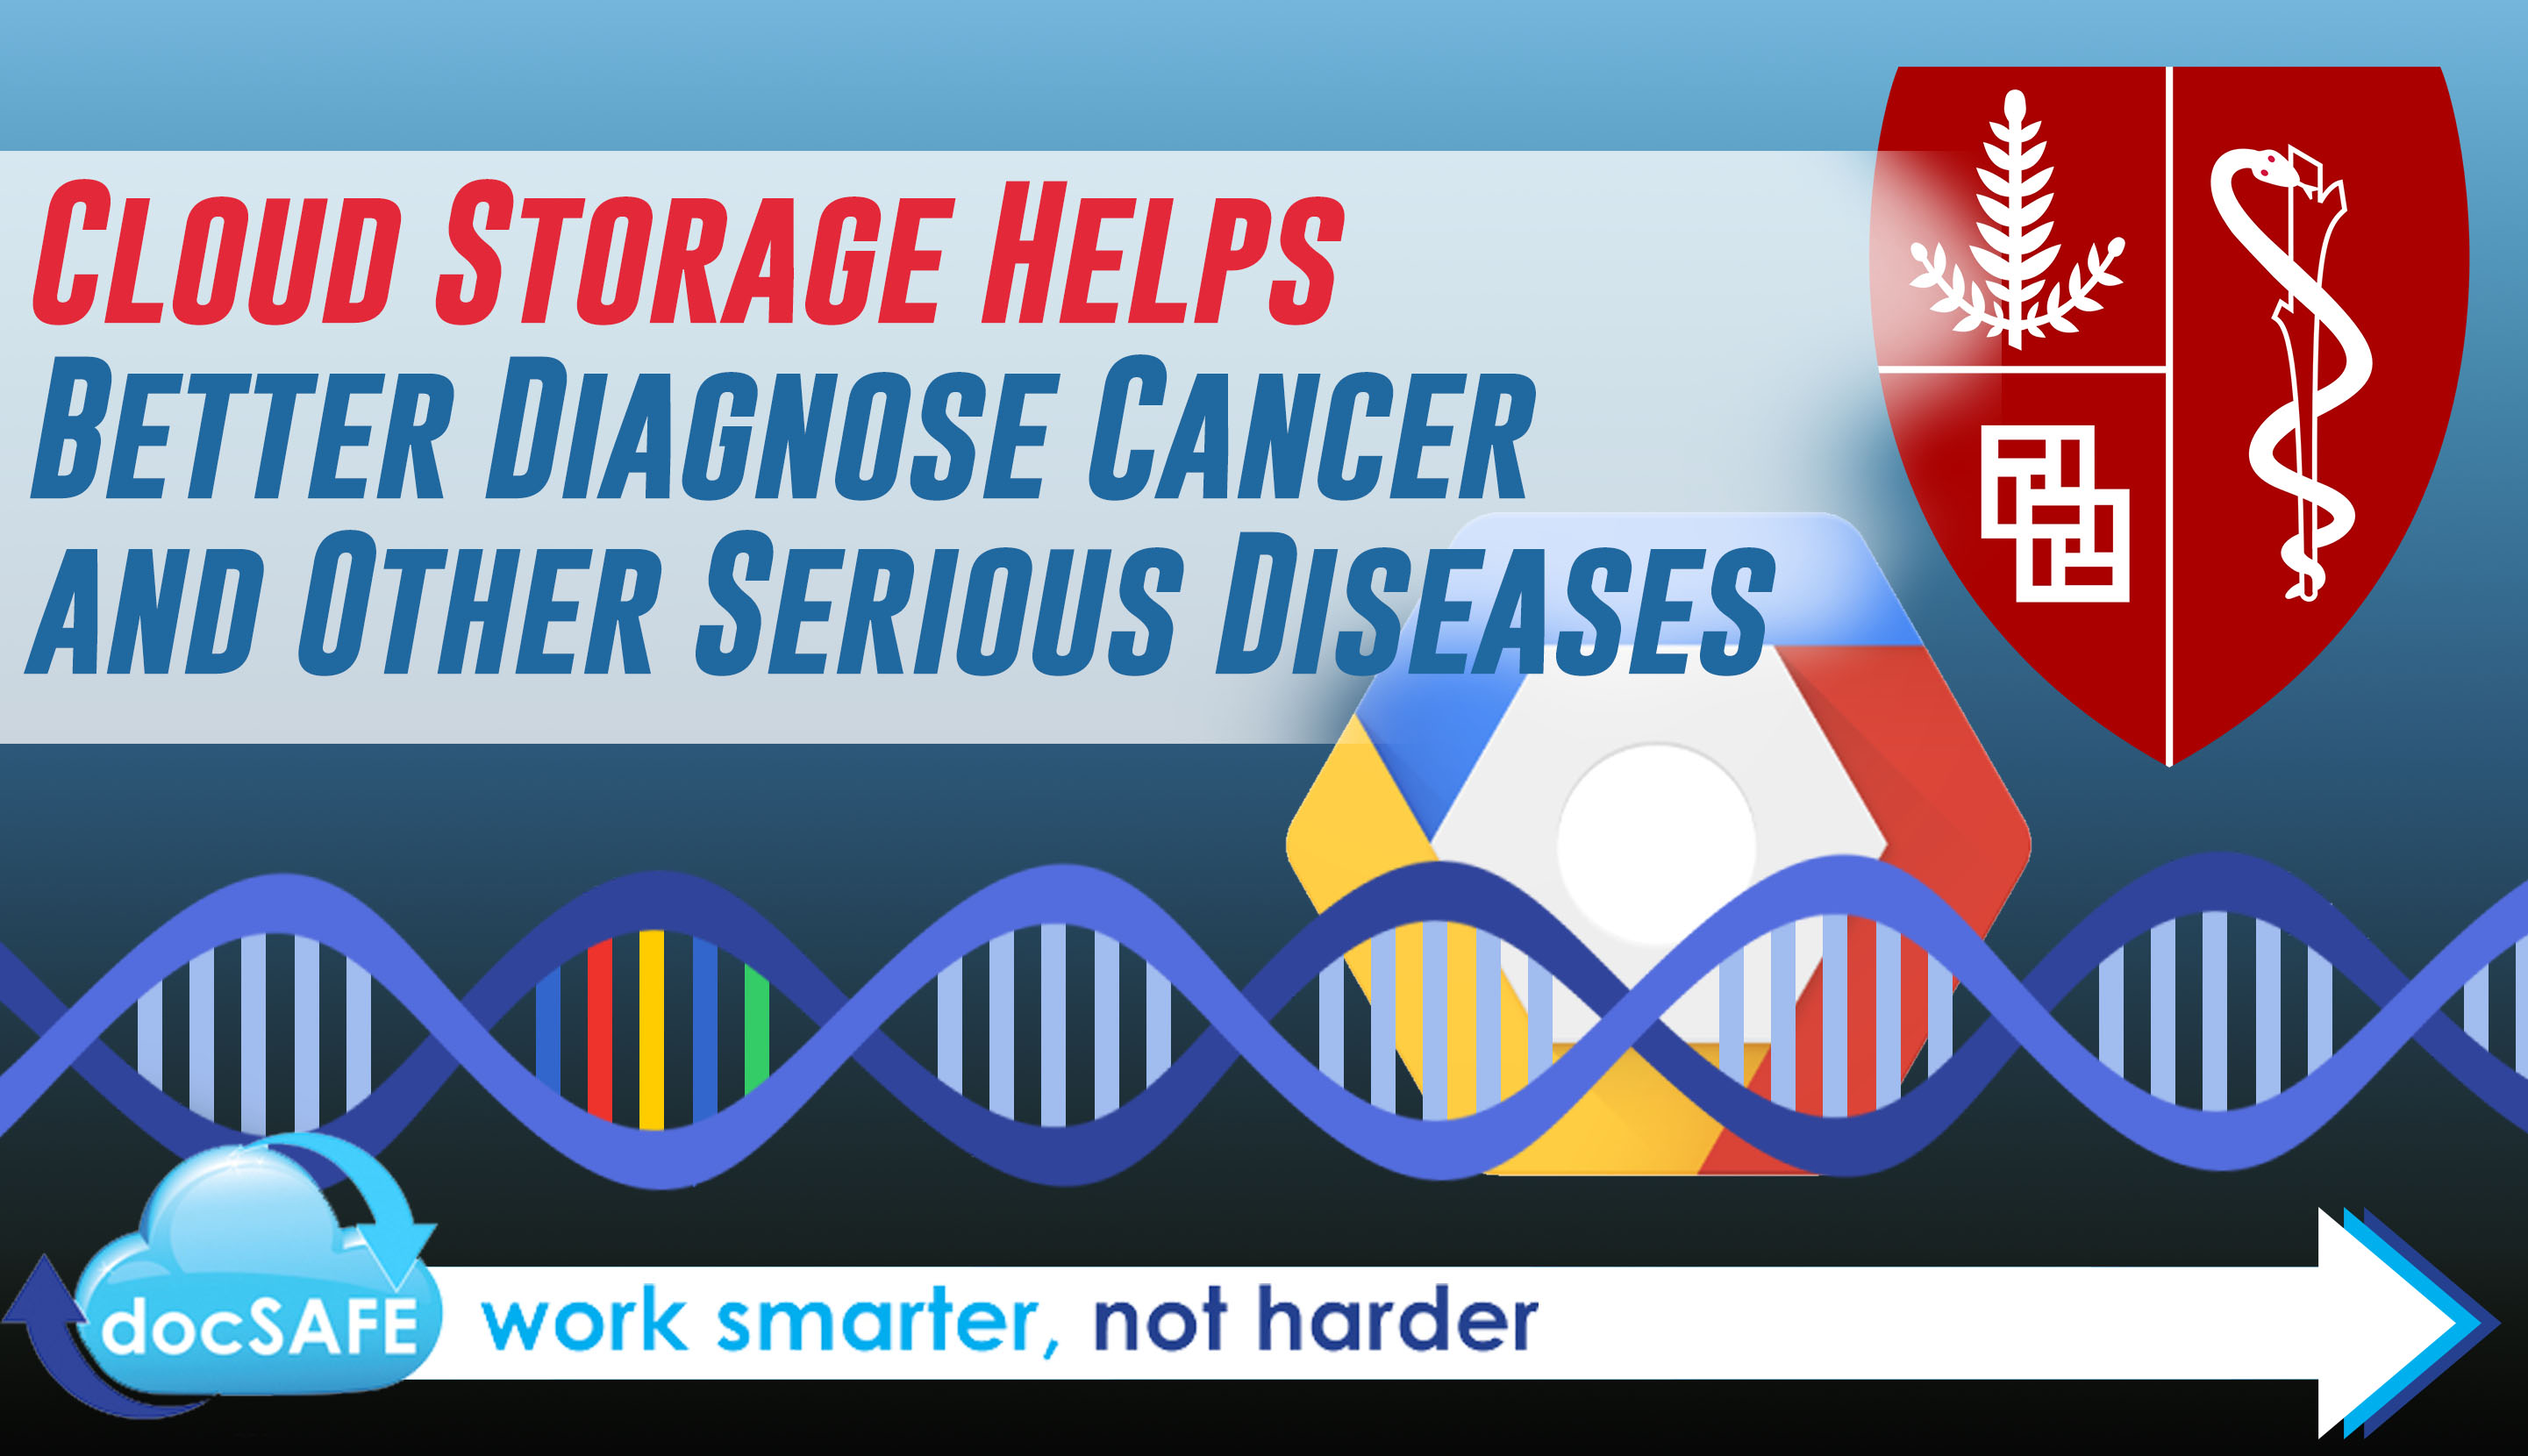 Cloud Storage Helps Better Diagnose Cancer and Other Serious Diseases